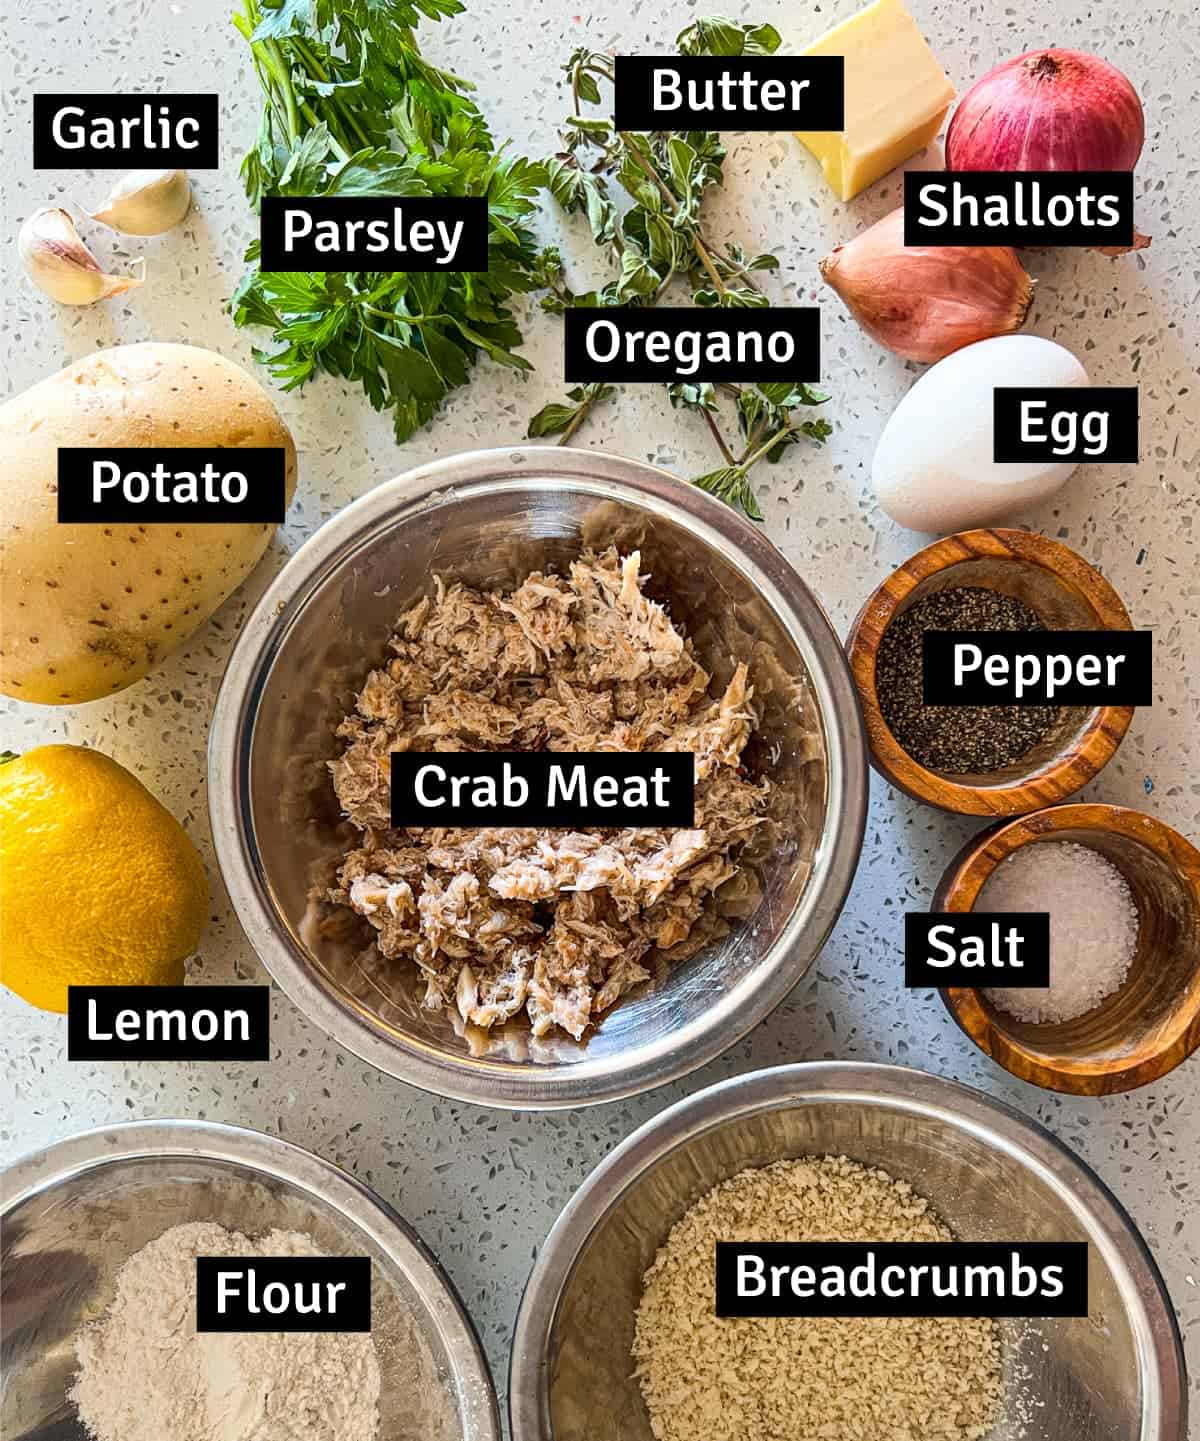 The ingredients for crab croquettes including crab meat, potato, lemon, herbs and more.